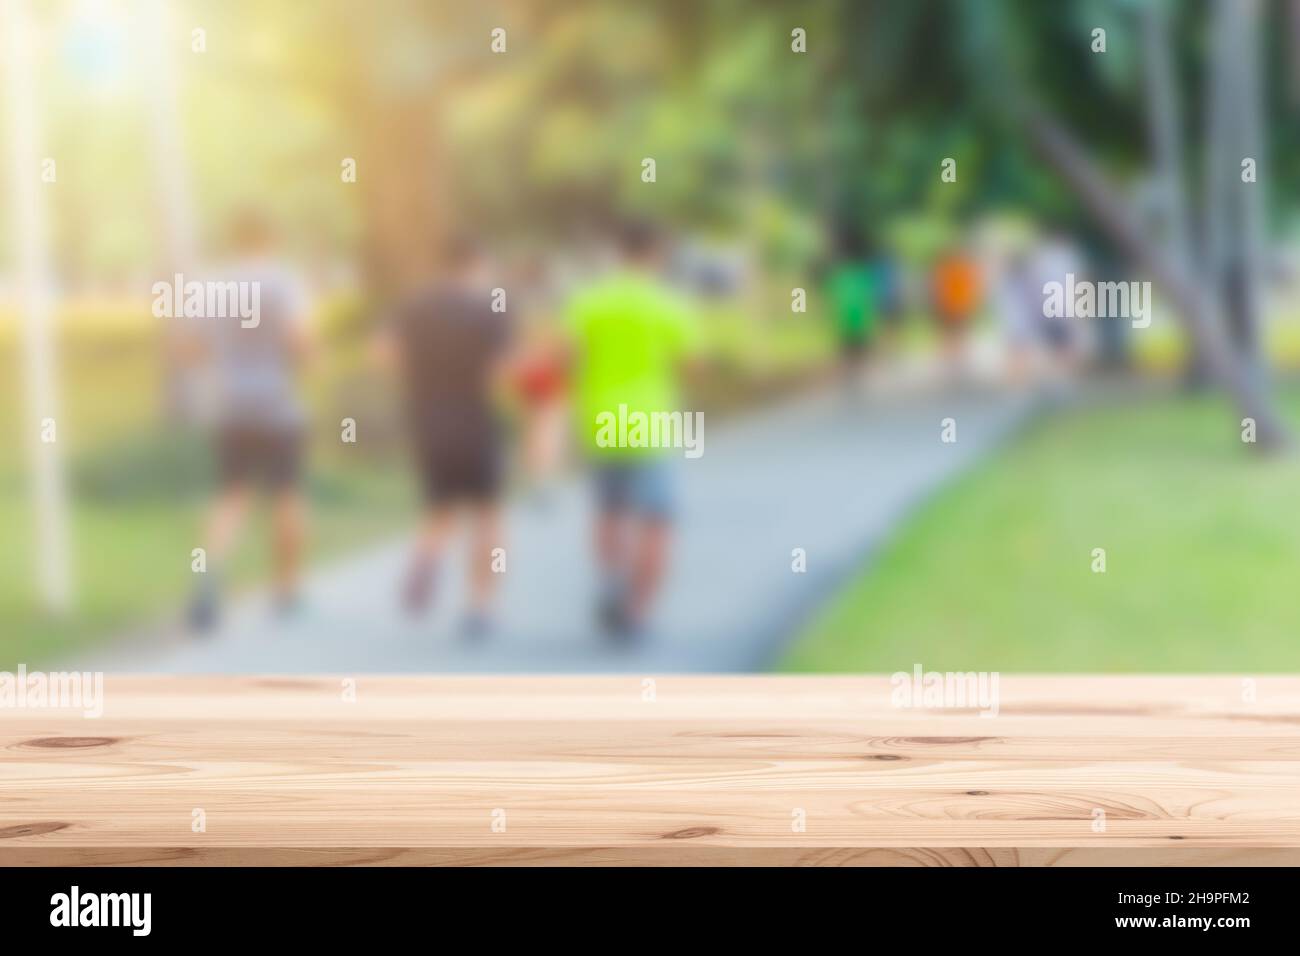 Blur people running in the park with wooden table top foreground for sport products montage background Stock Photo